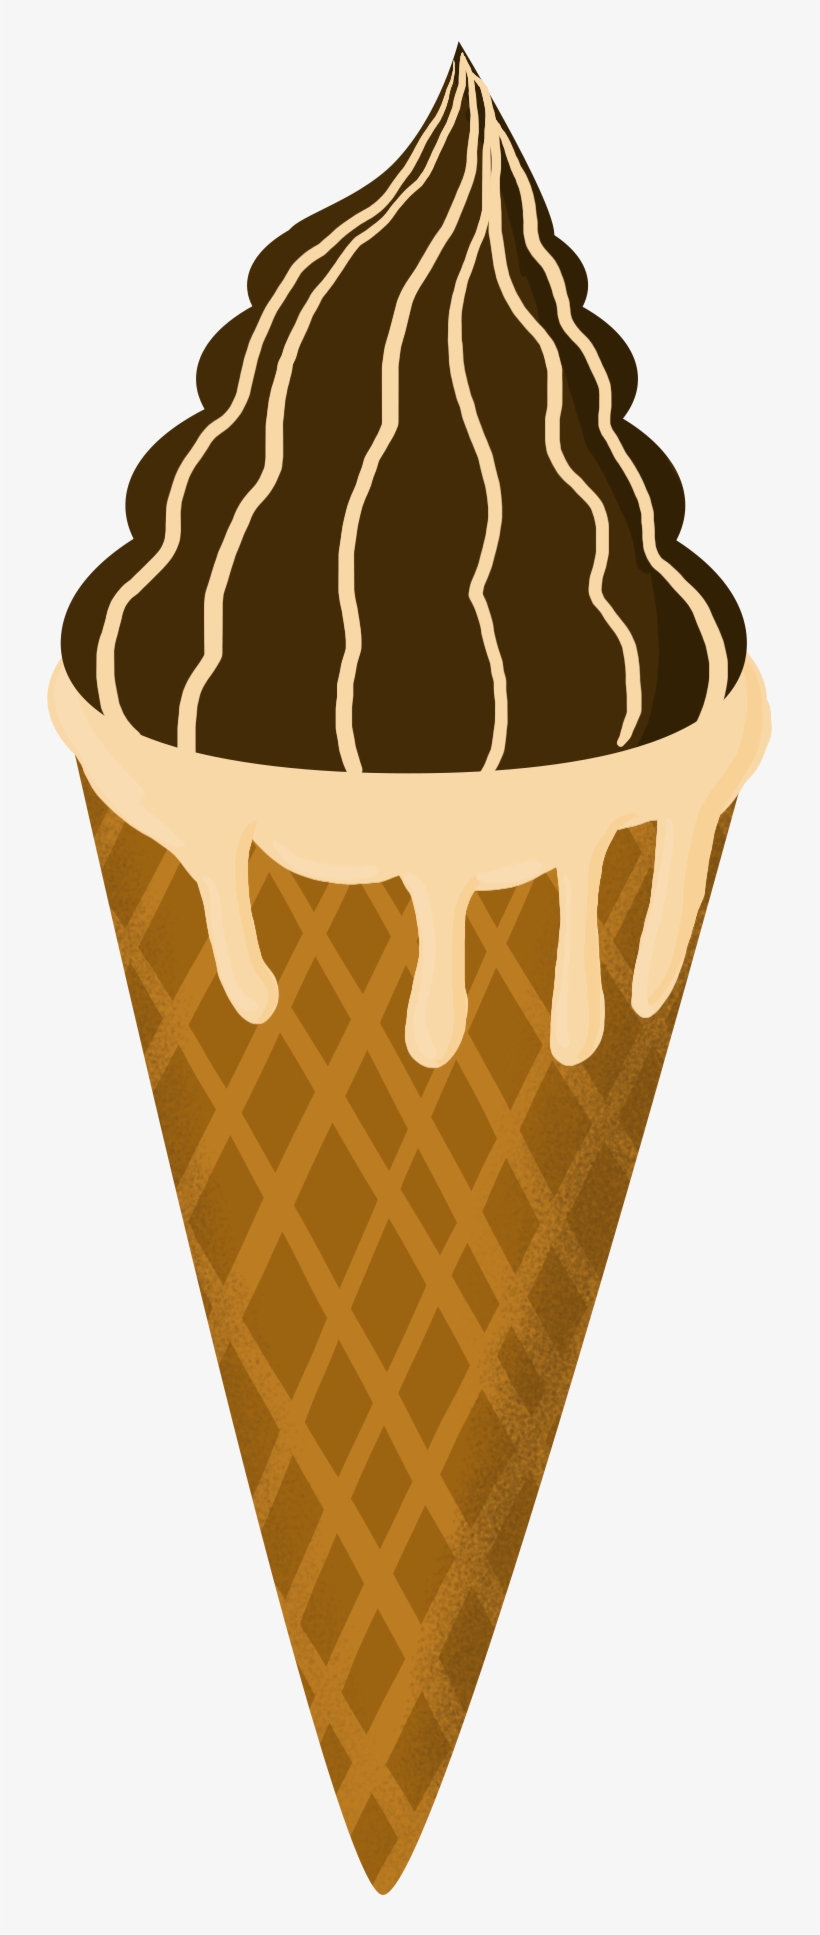 Ice Cream Food Decorative Elements Png And Psd - Soft Serve Ice Creams, transparent png #9842489